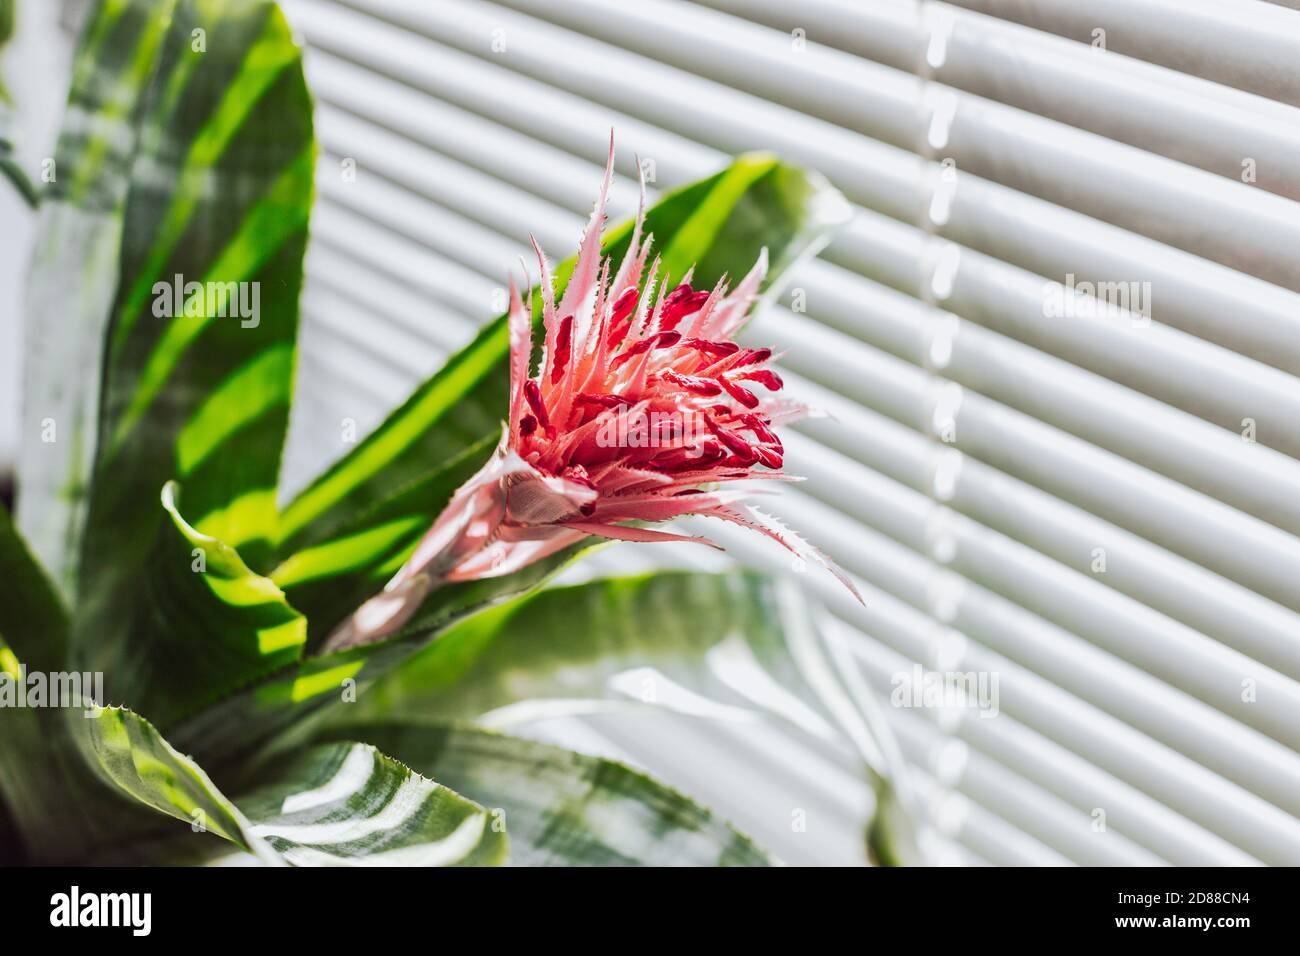 Houseplant with large green leaves and a pink flower  Aechmea, on a background of blinds, on a white windowsill Stock Photo